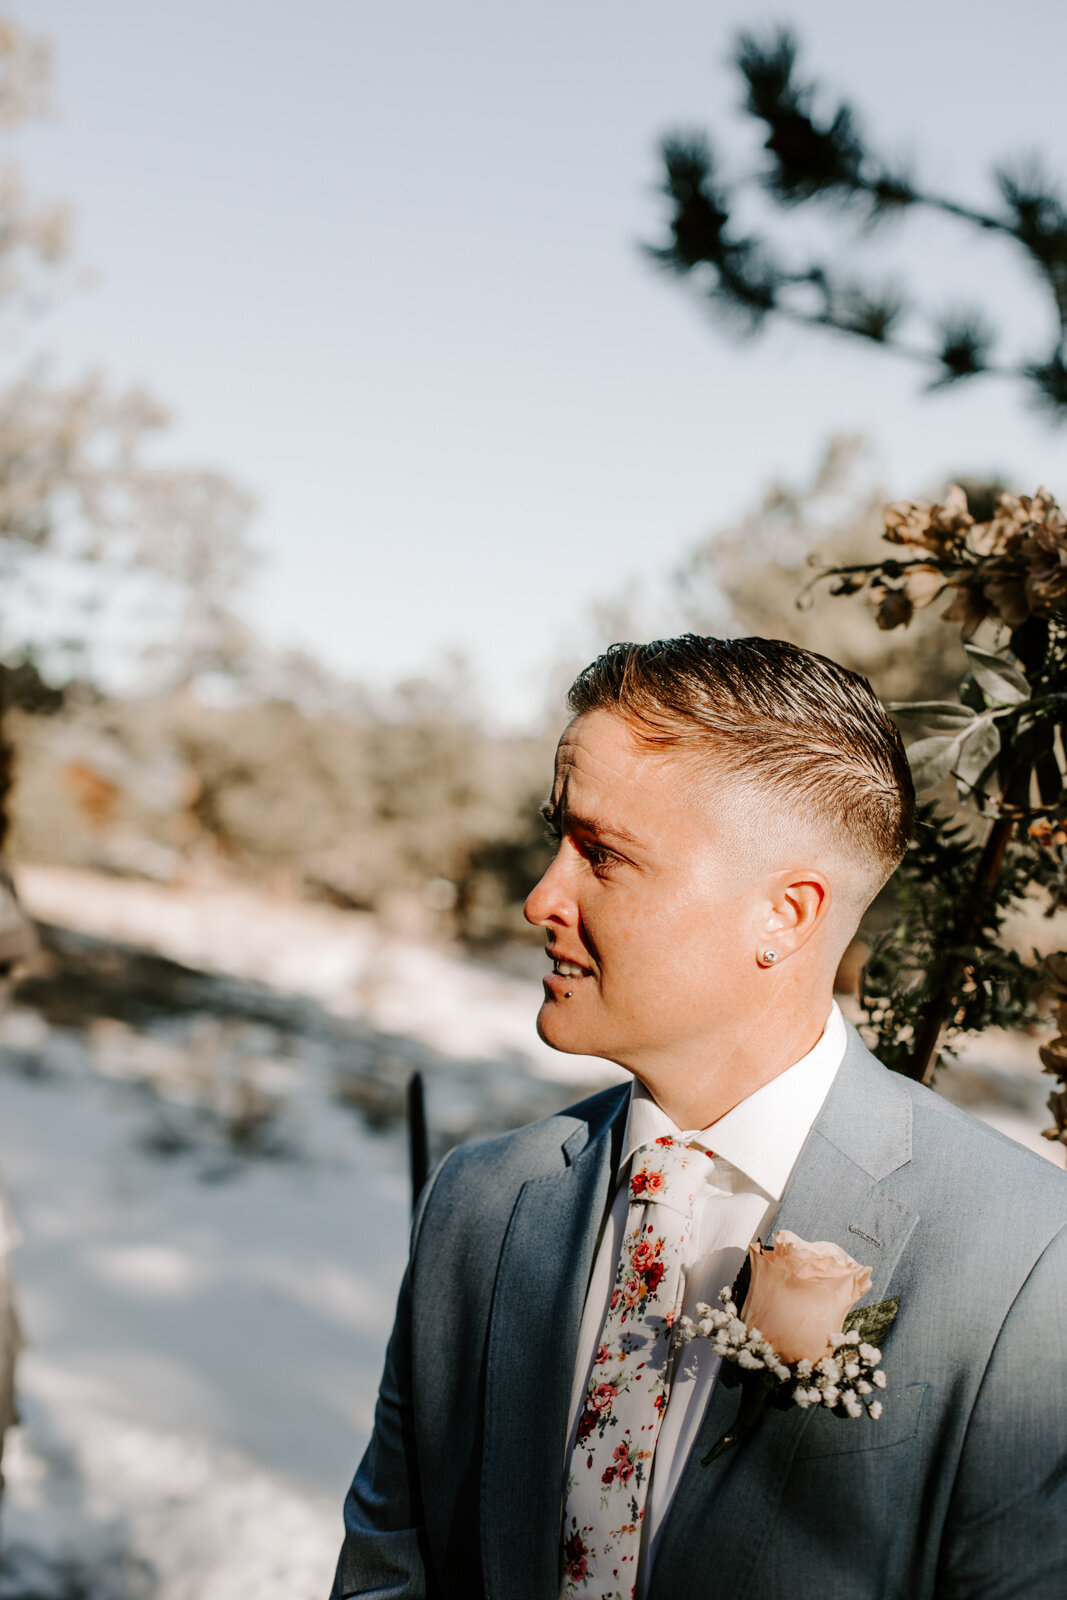 emotional groom/broom waiting at the end of the aisle and holding her hands while waiting for her bride to walk down the aisle at Estes Park AirBnB Elopement for an LGBTQ couple with Colorado elopement photographer Diana Coulter